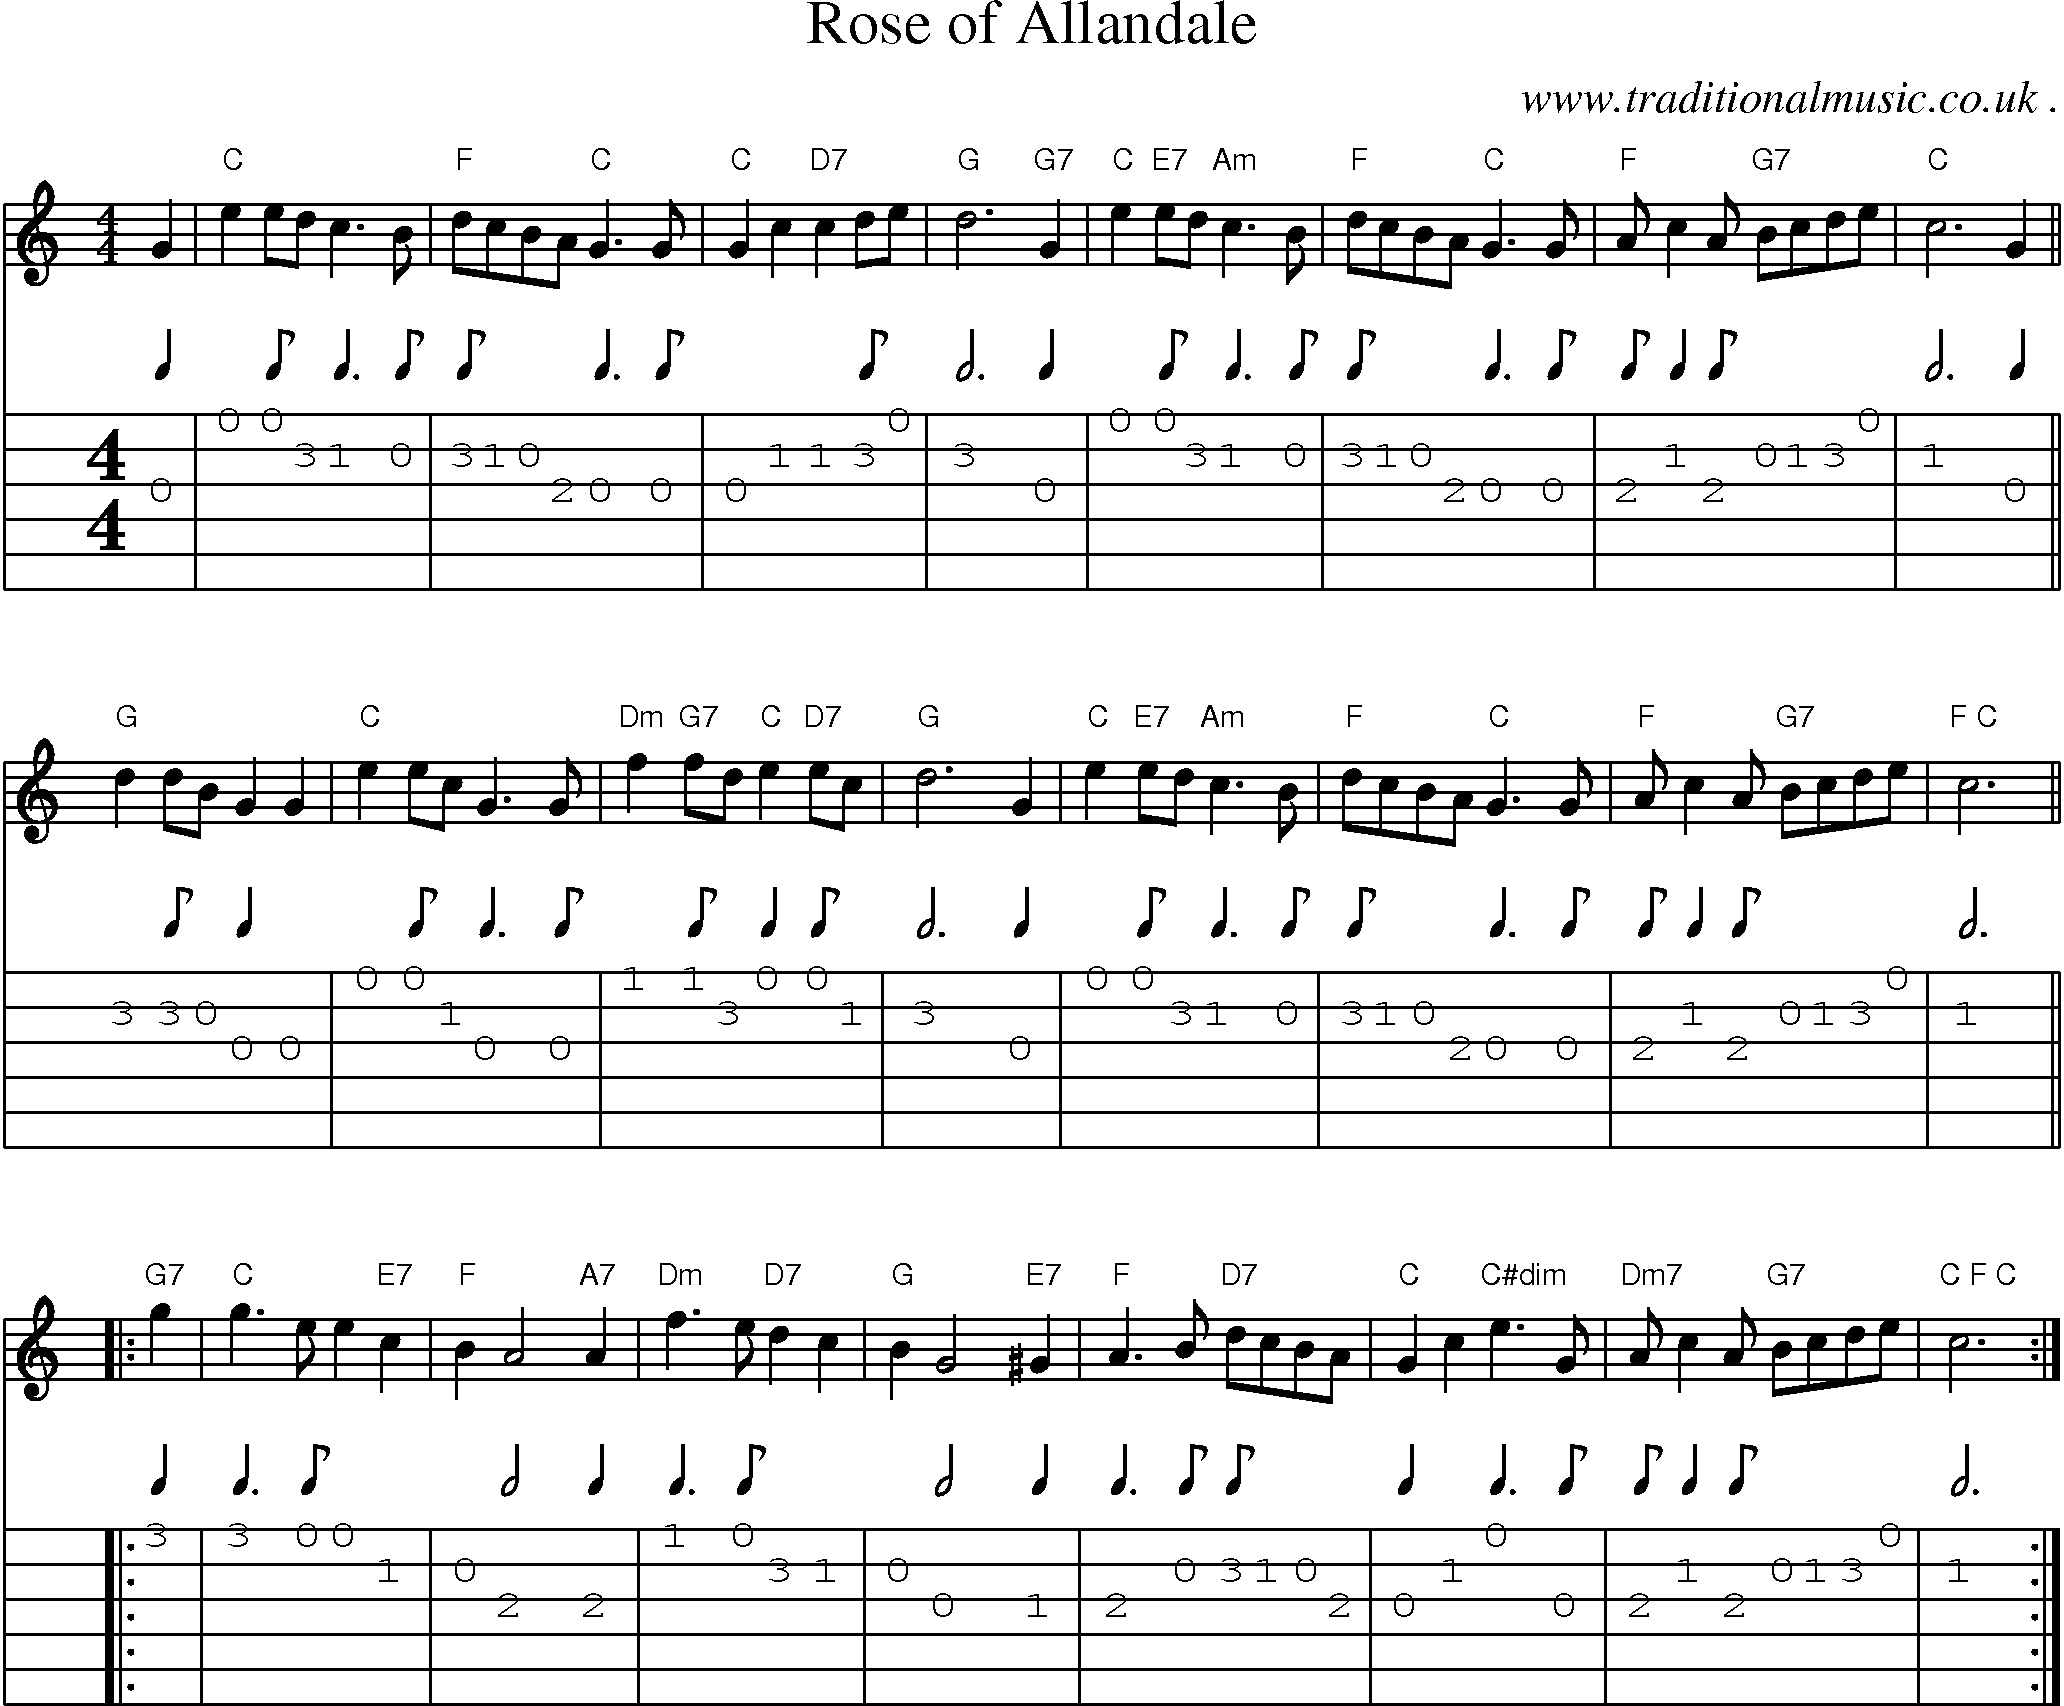 Sheet-music  score, Chords and Guitar Tabs for Rose Of Allandale